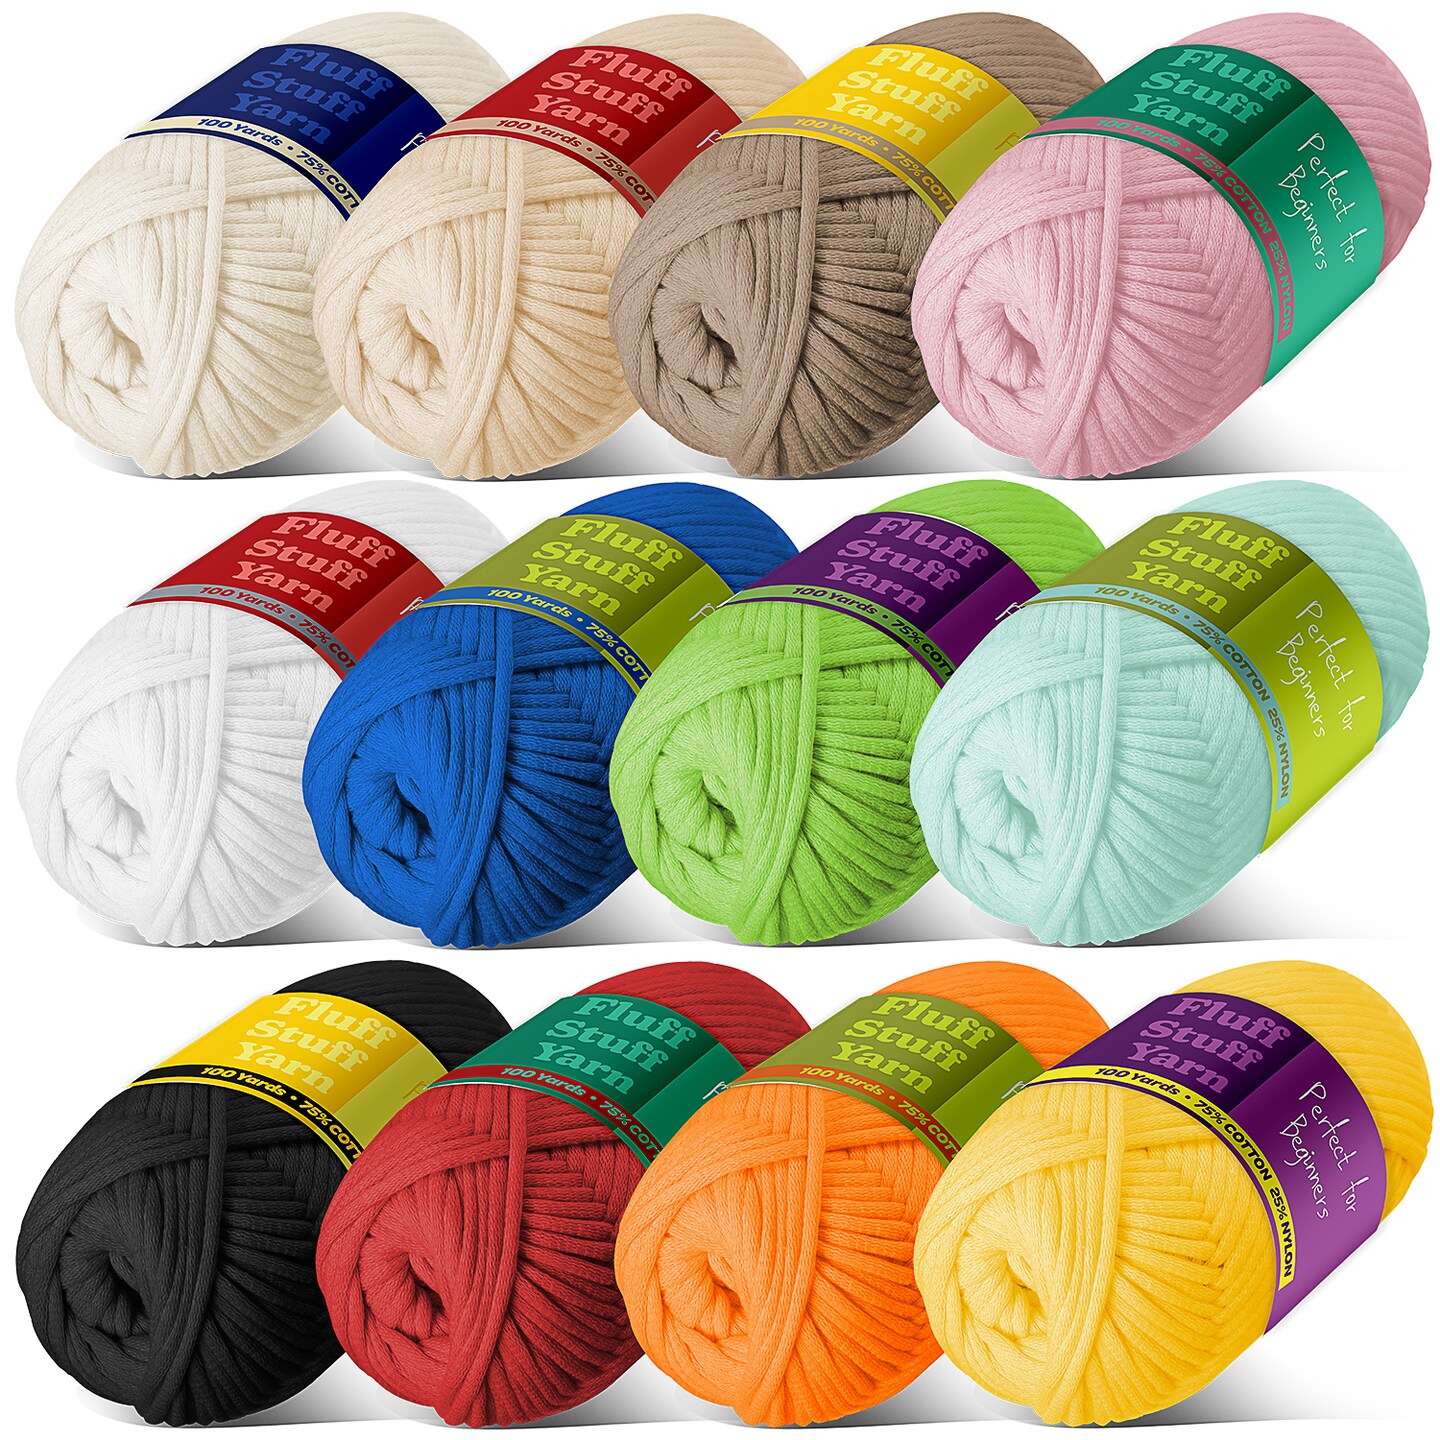 The Woobles Easy Peasy Yarn, Crochet & Knitting Yarn for Beginners with  Easy-To